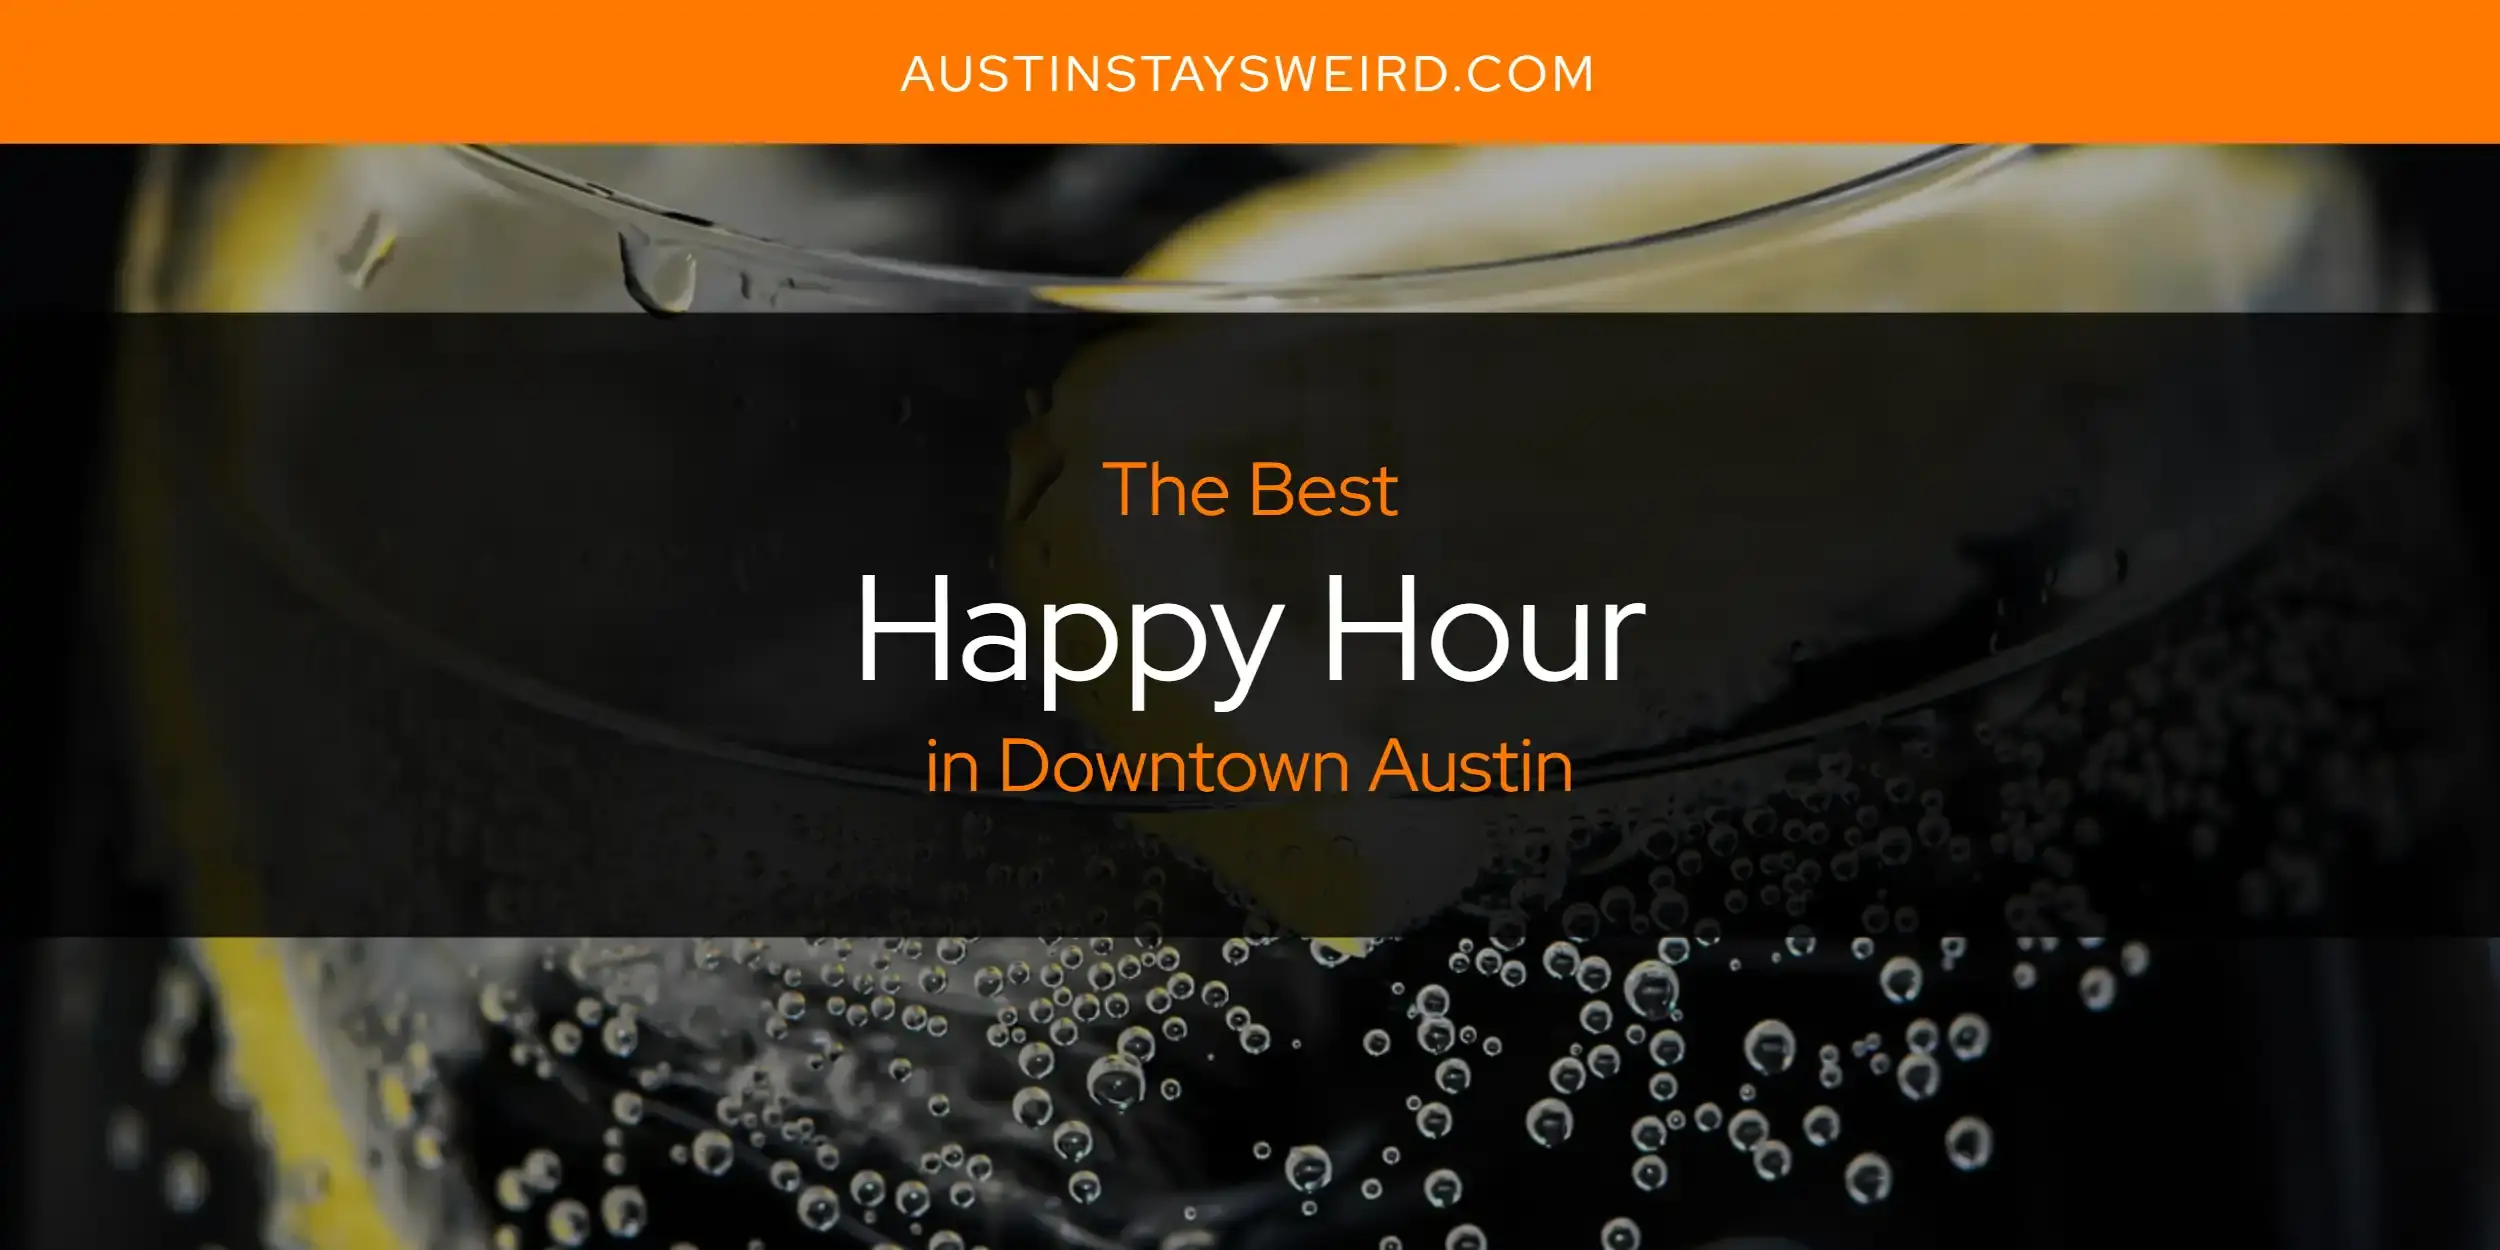 Best Happy Hour in Downtown Austin? Here's the Top 8